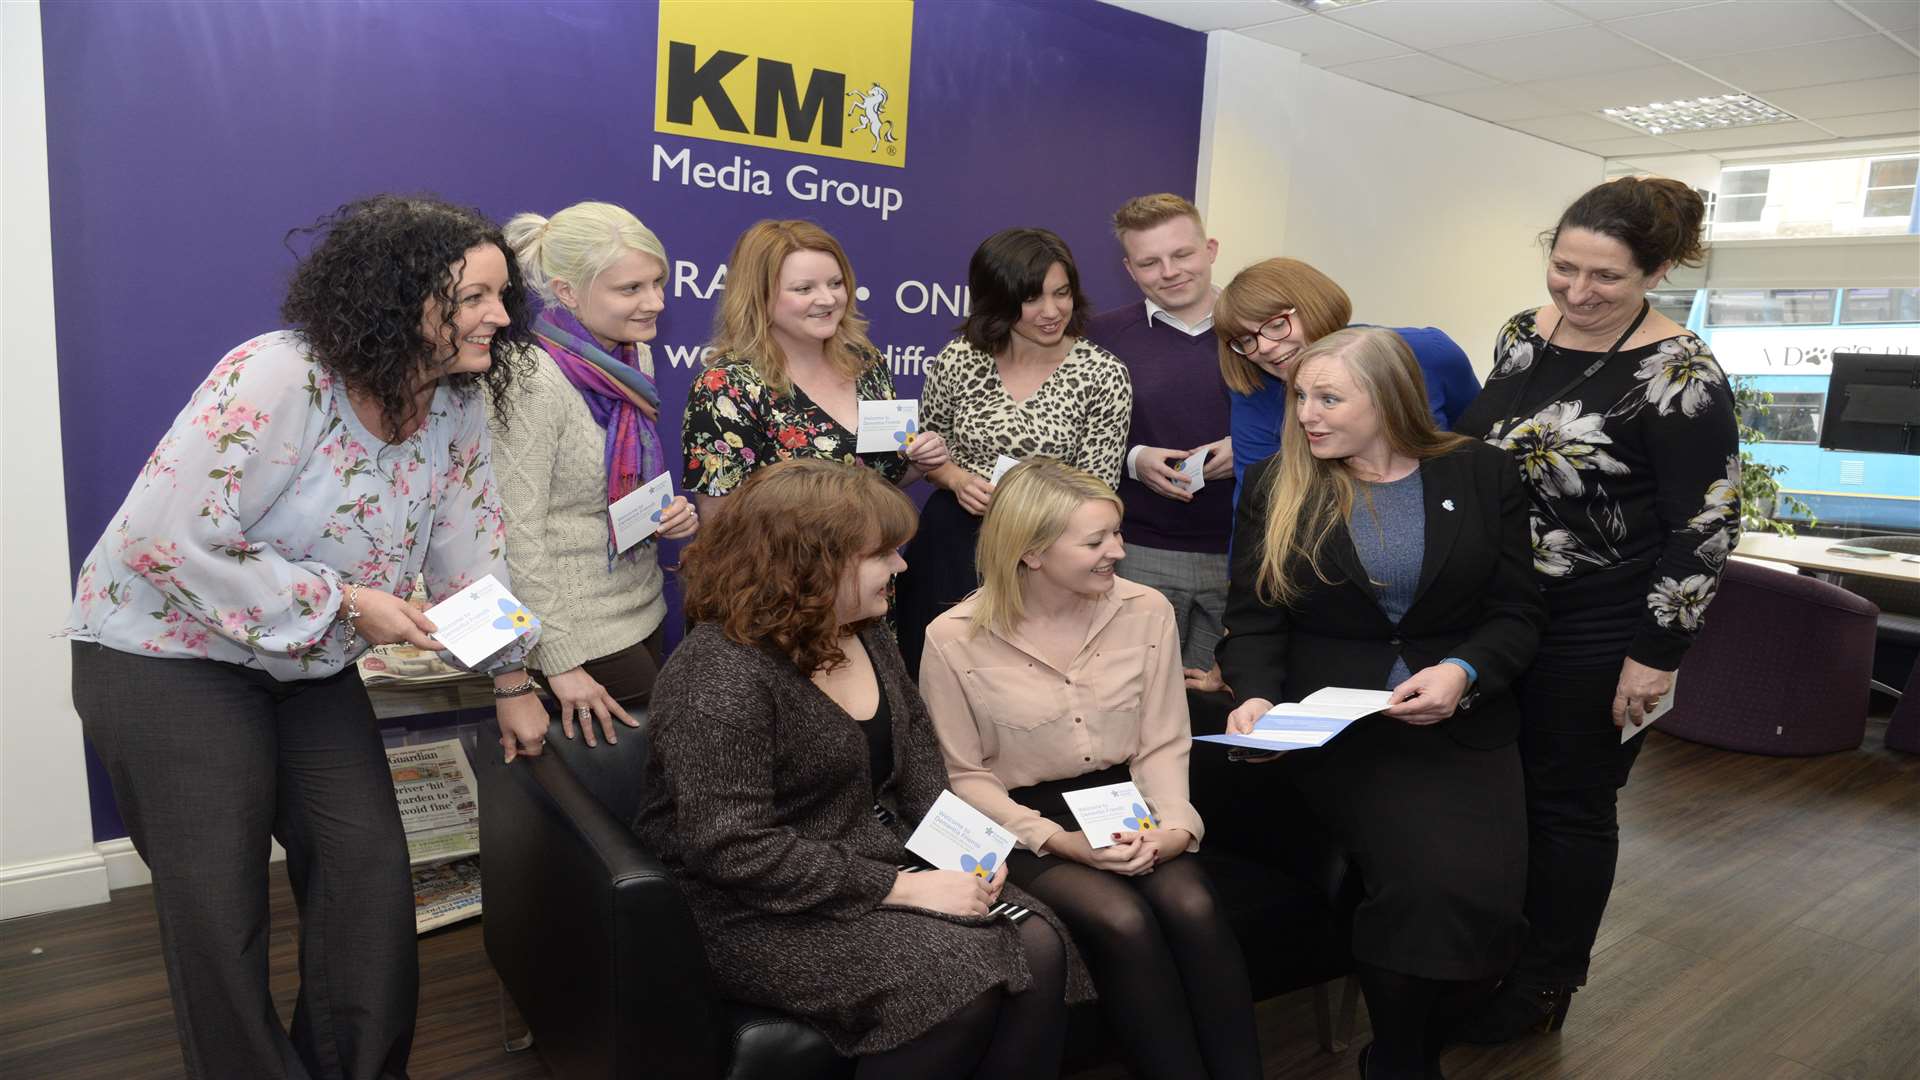 KM staff with Denise Wilton, right front, of the Alzheimer's Society at the Dementia Friends session